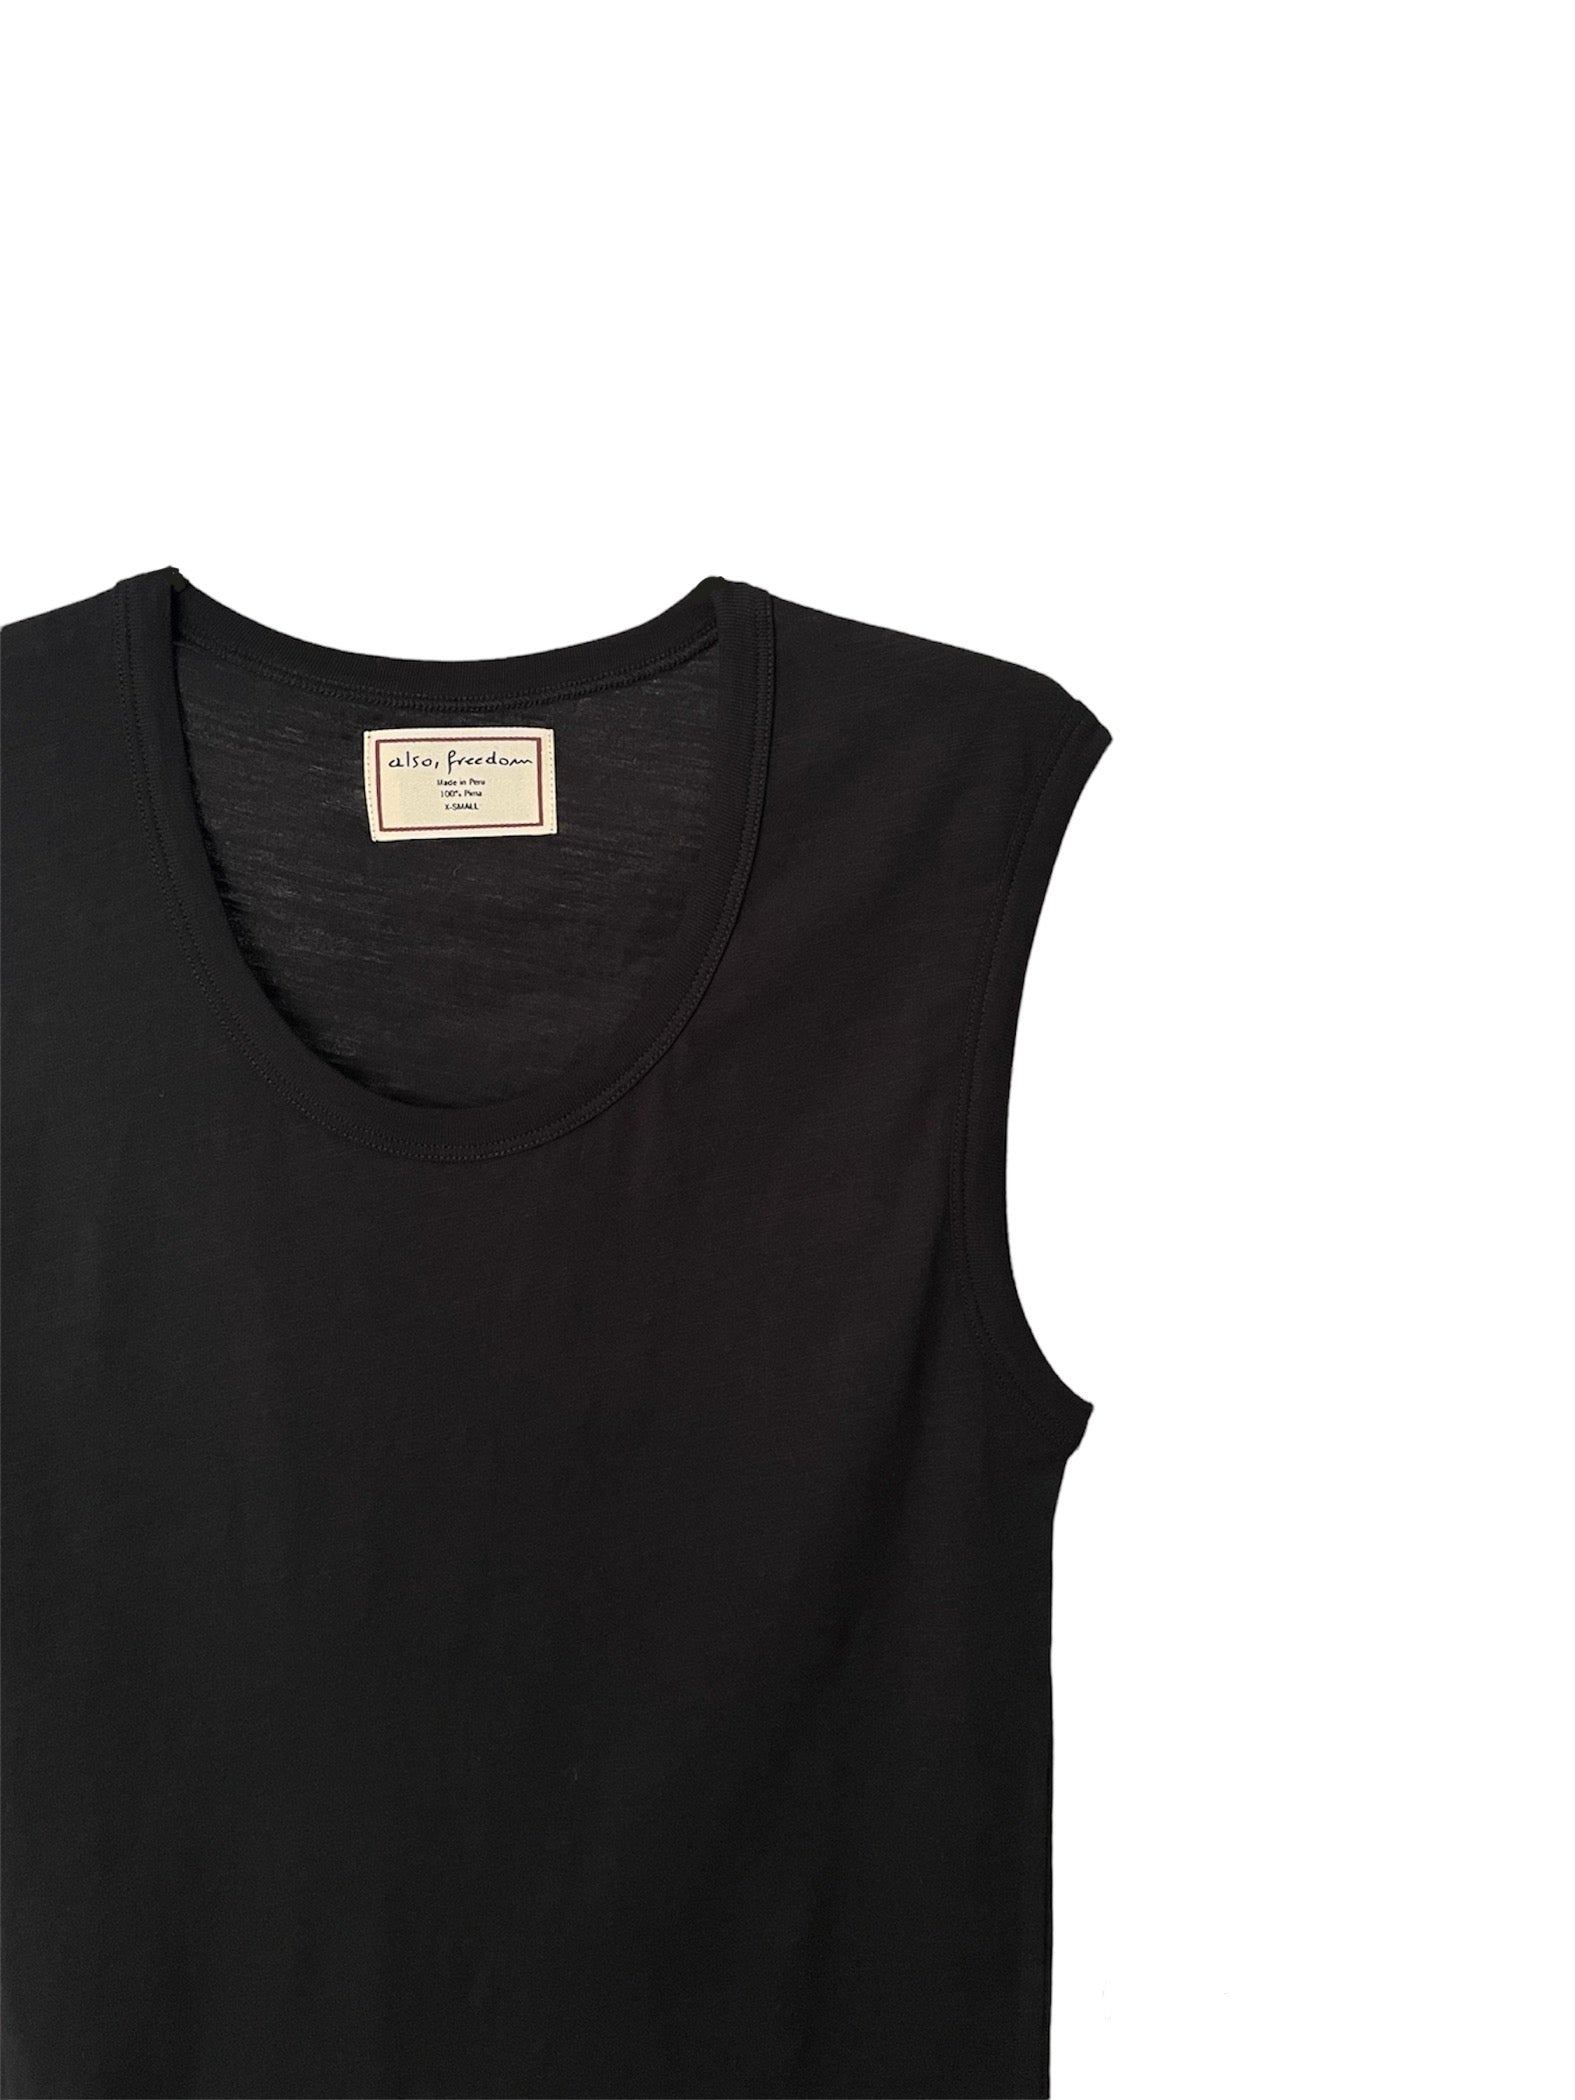 The Purist Scoop Slub, Air Muscle Tee - Also, Freedom